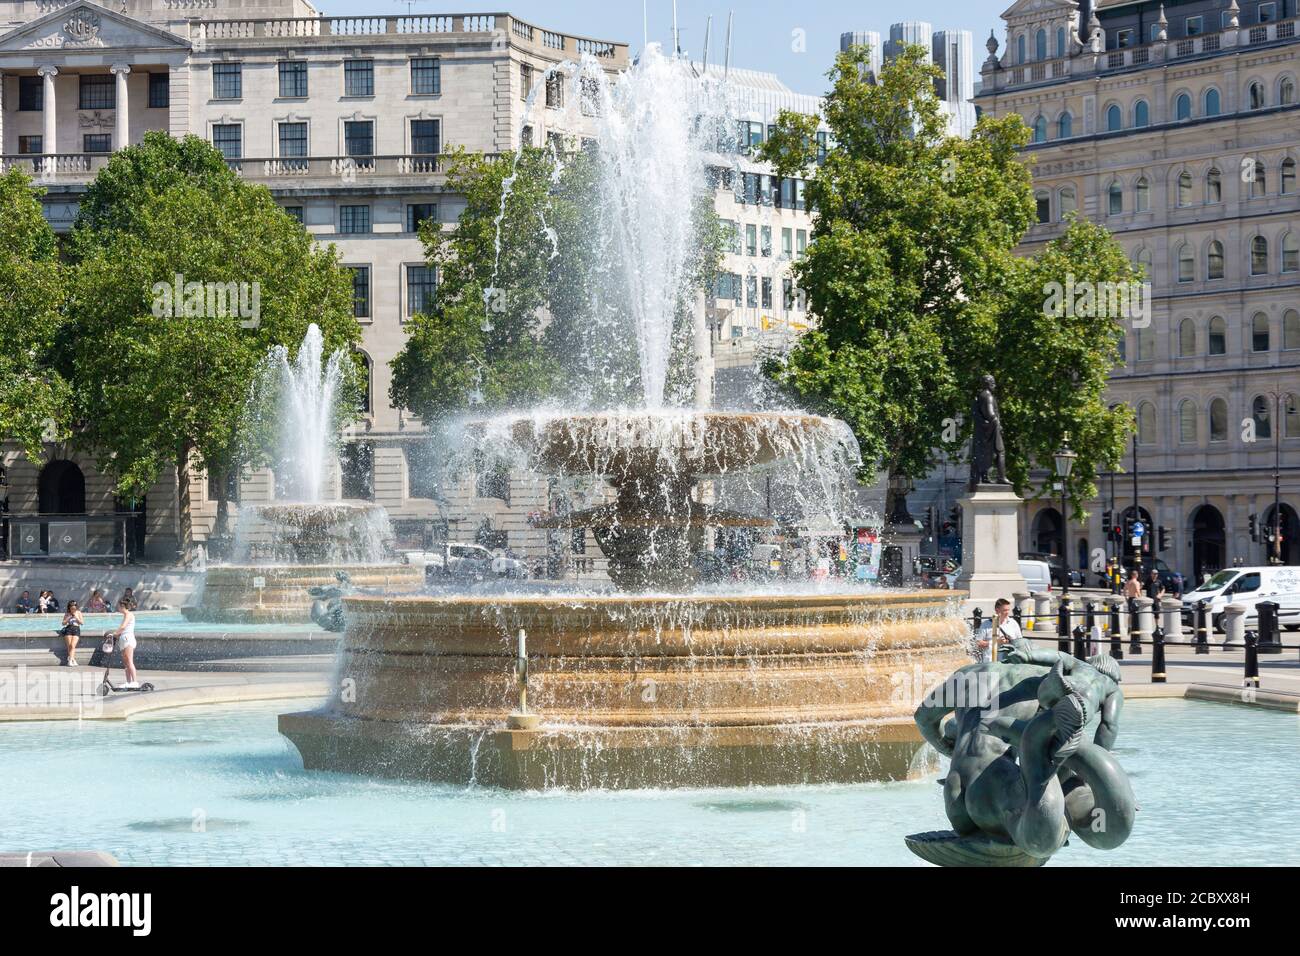 Fontane in Trafalgar Square, City of Westminster, Greater London, England, Regno Unito Foto Stock